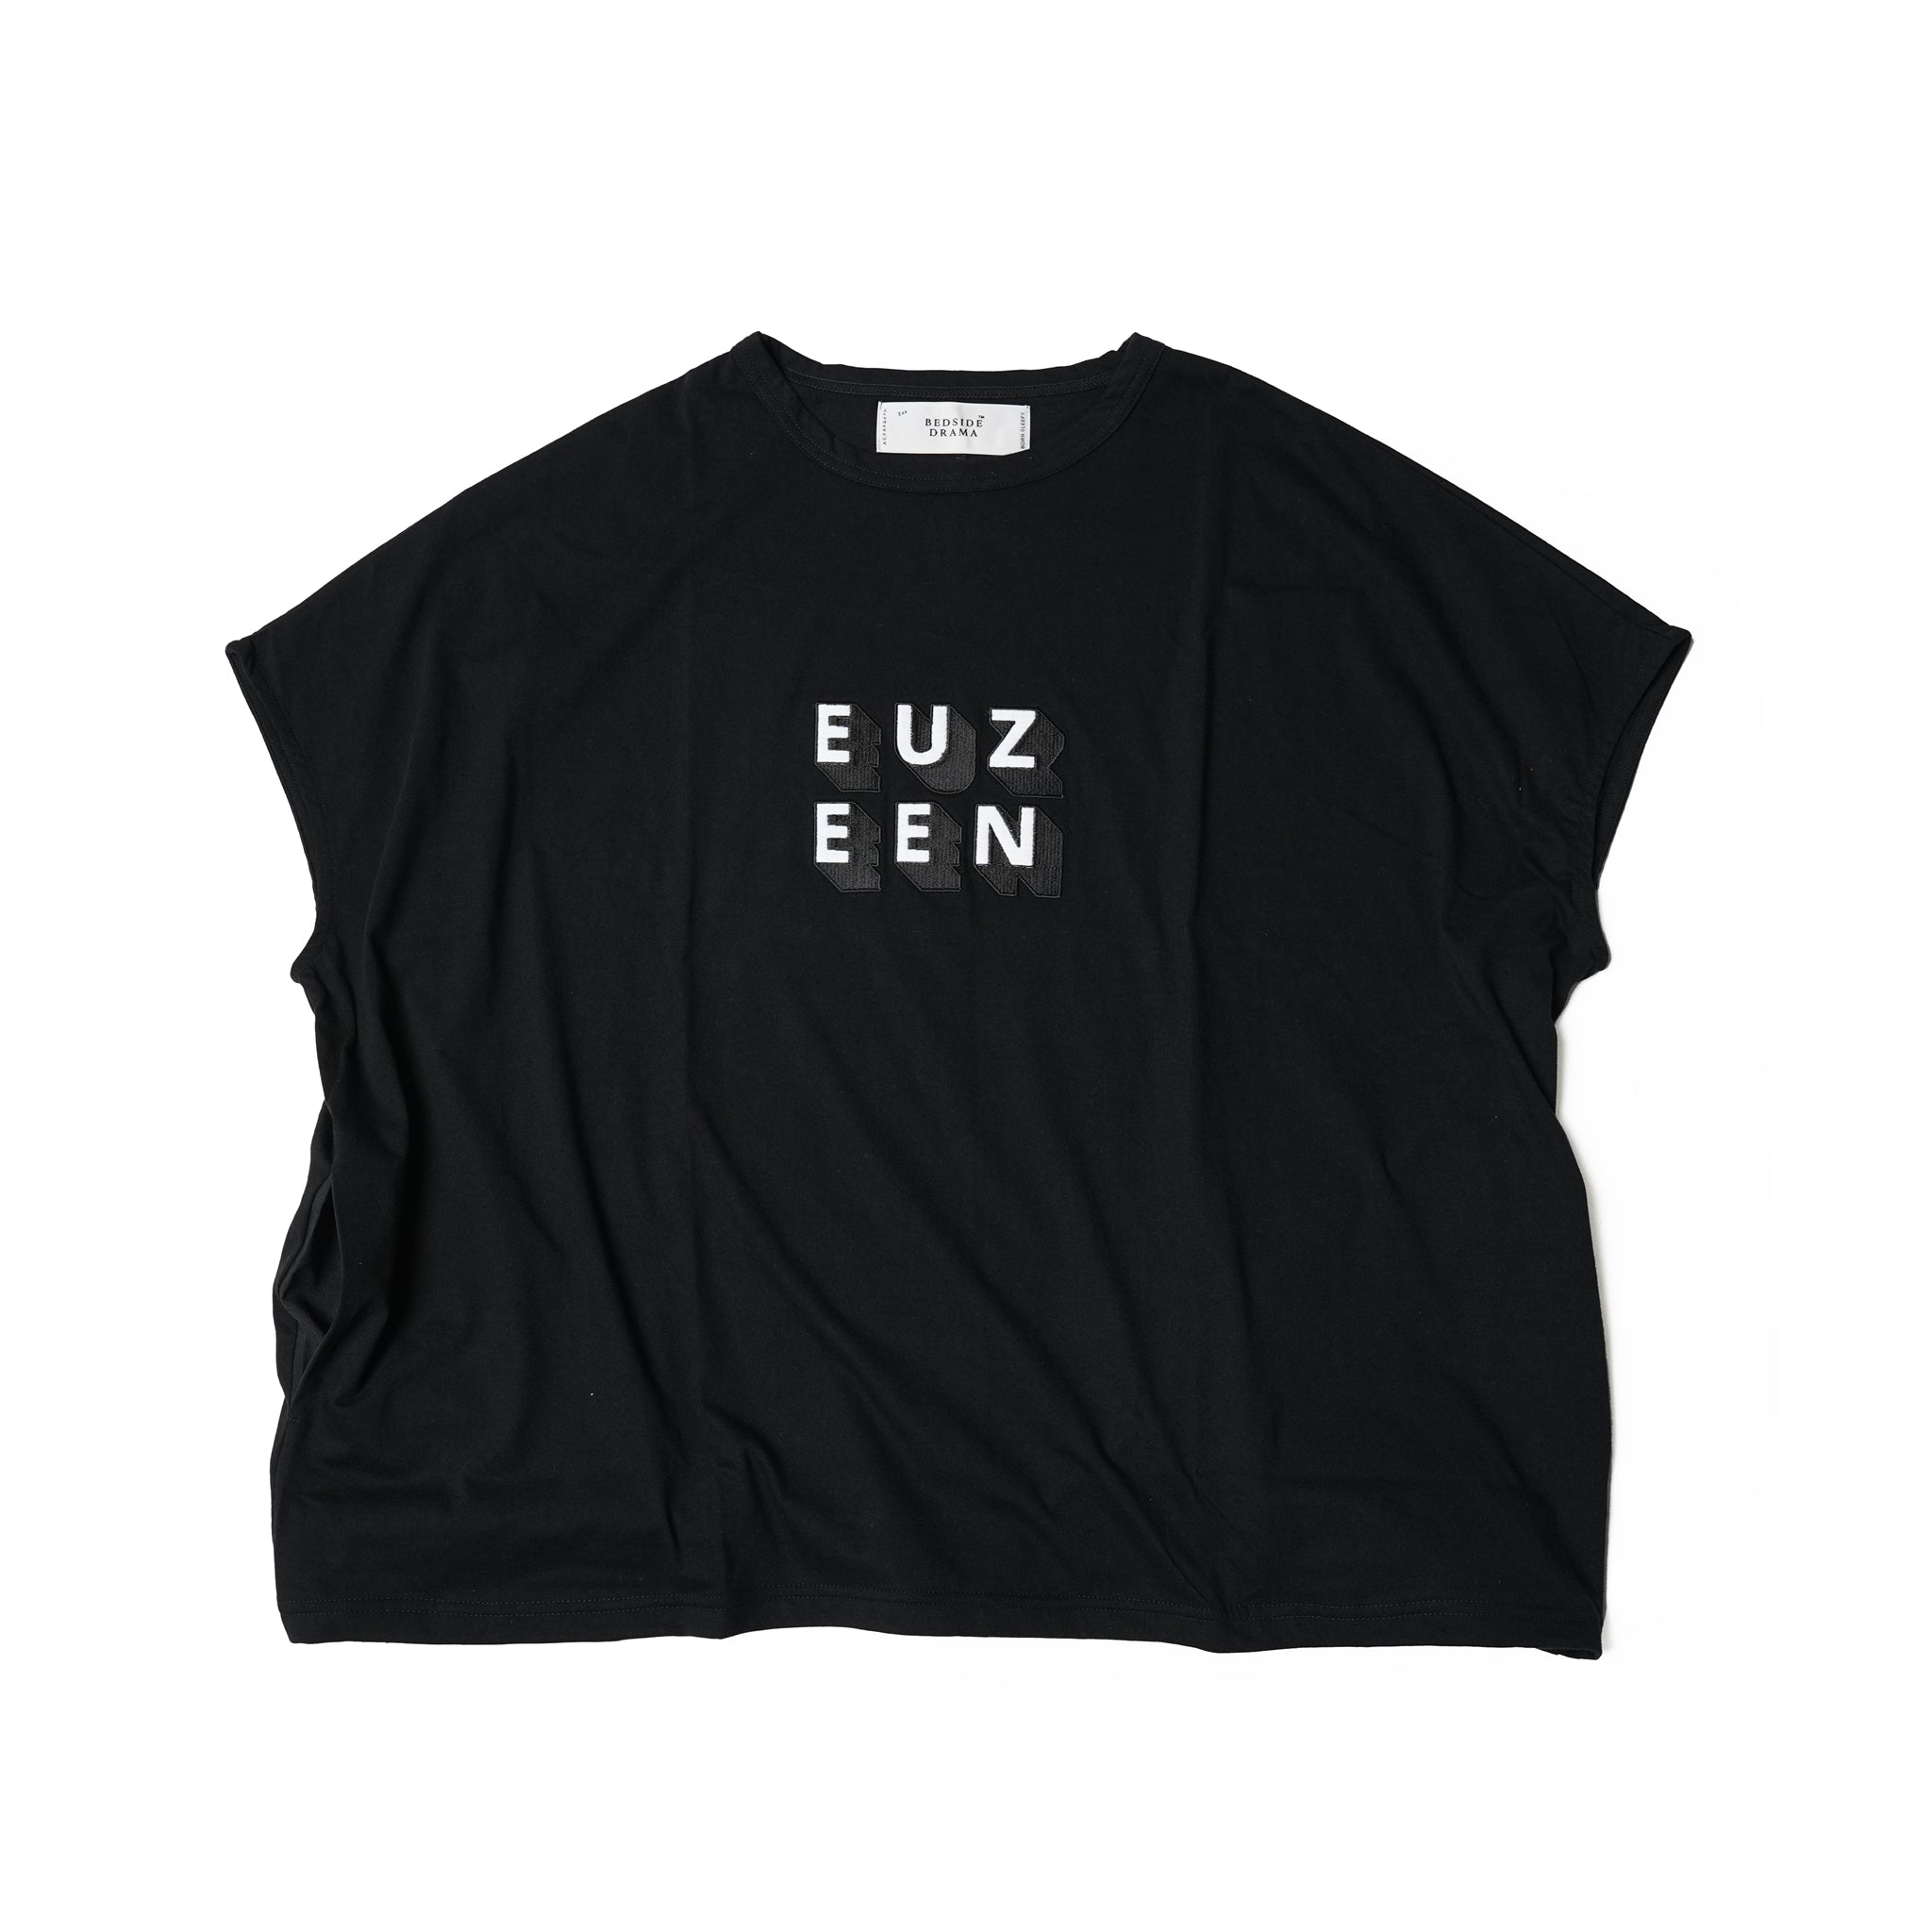 No:bsd23AW-34Cb | Name:Winter Chillout Tee/EUZEEN | Color:Black【BEDSIDEDRAMA_ベッドサイドドラマ】